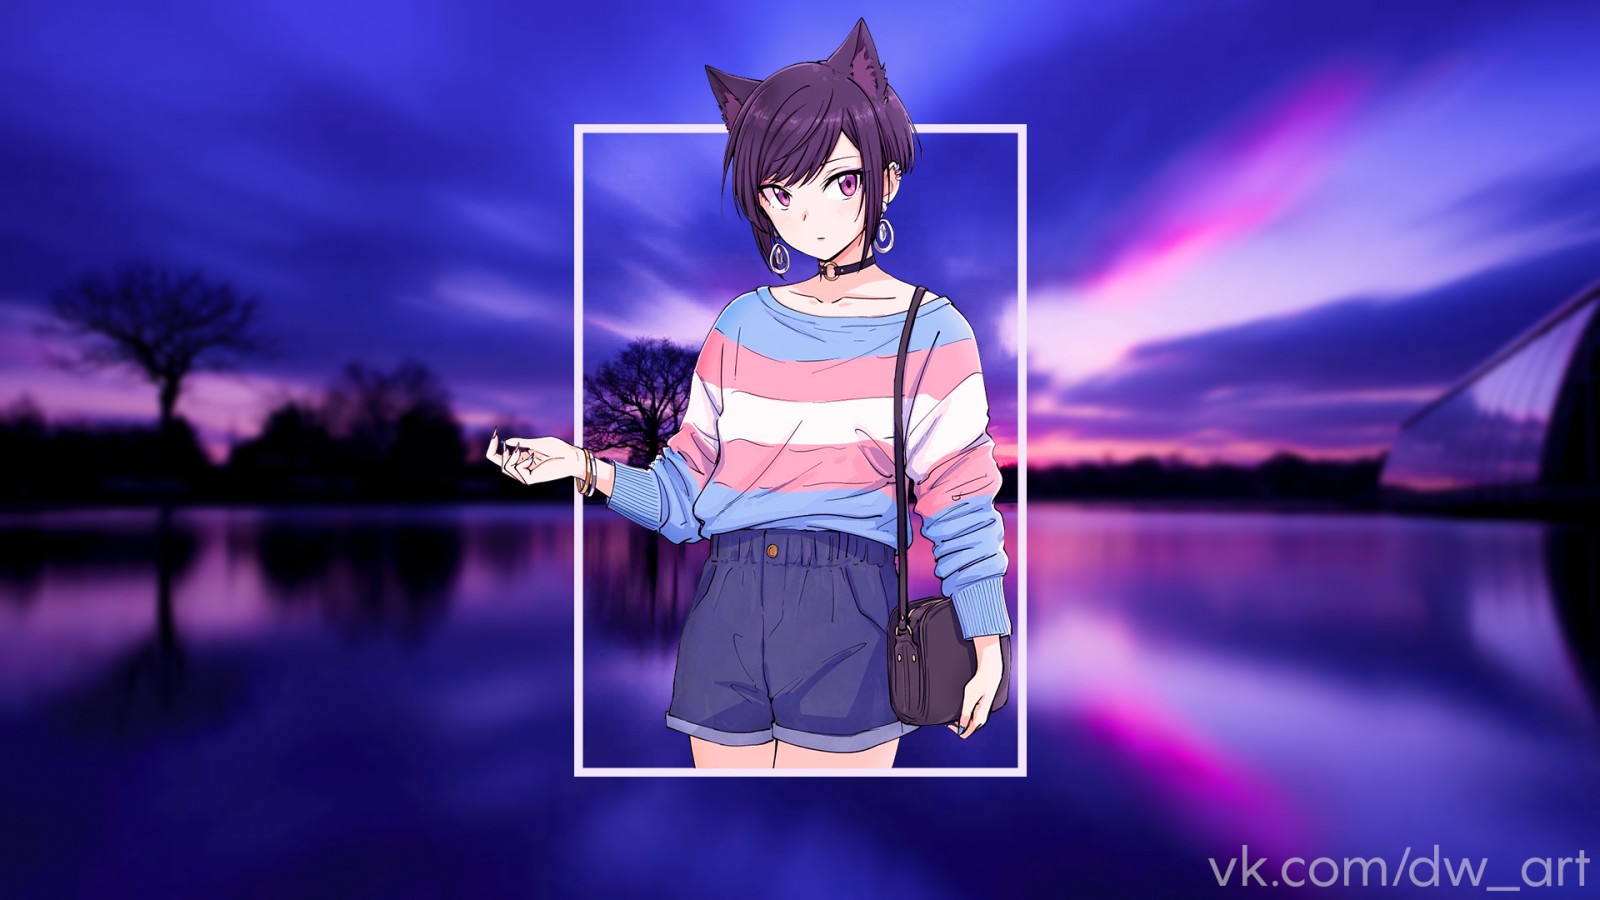 Wallpaper, femboy, anime sky, picture in picture, purple eyes, animal ears 1920x1080